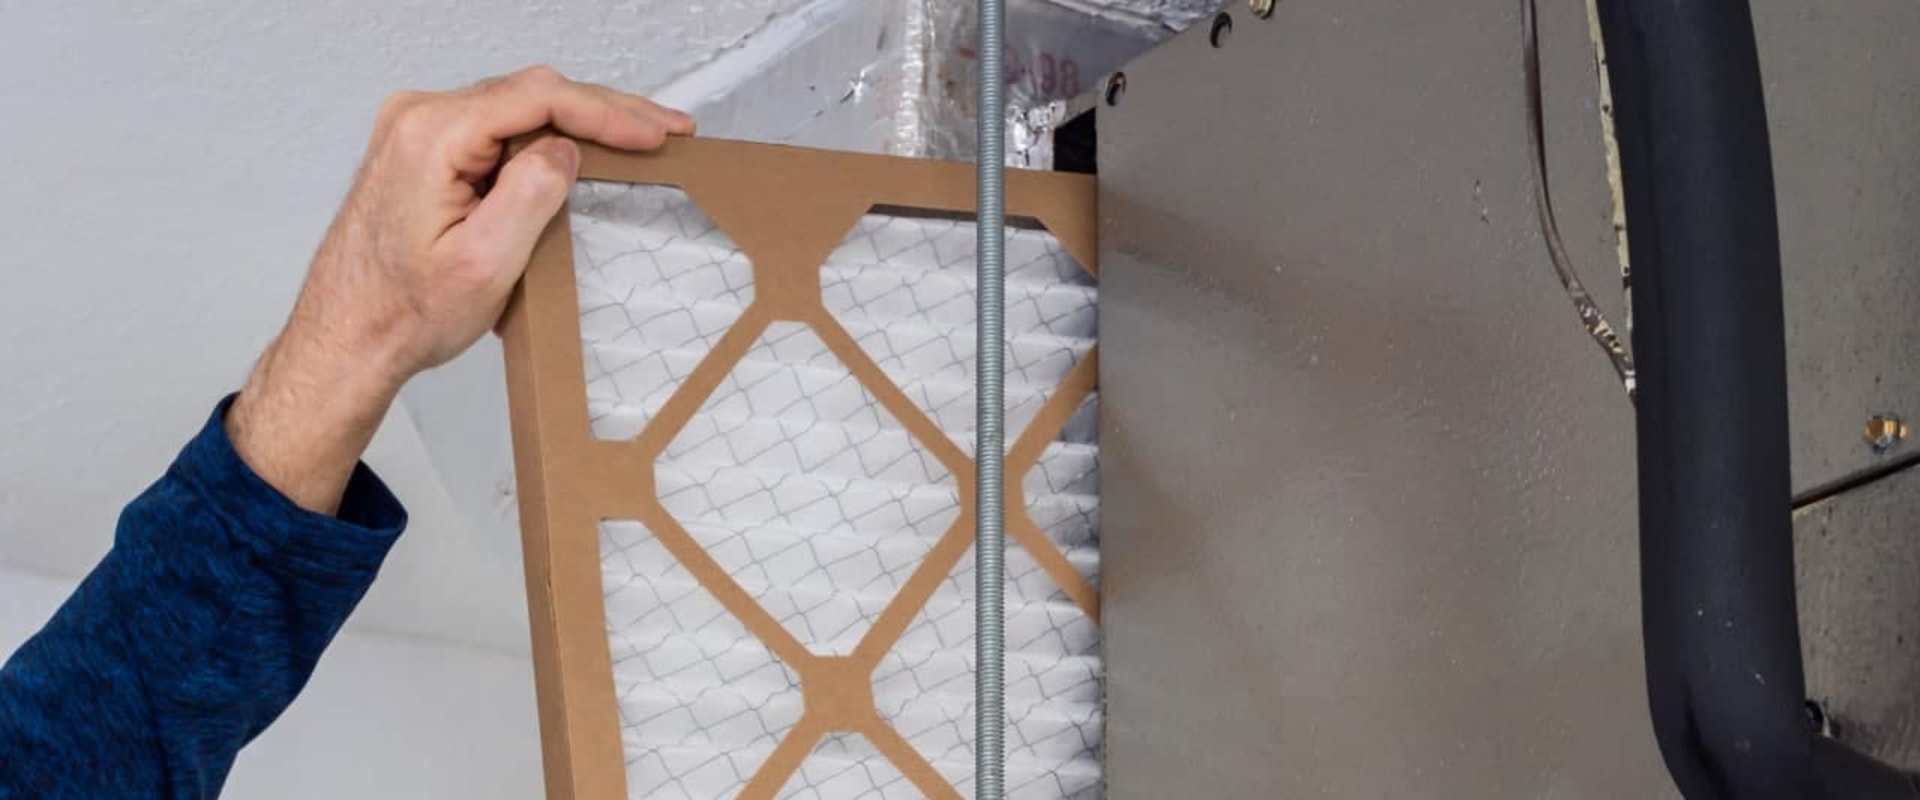 How much does it cost to change a furnace filter?